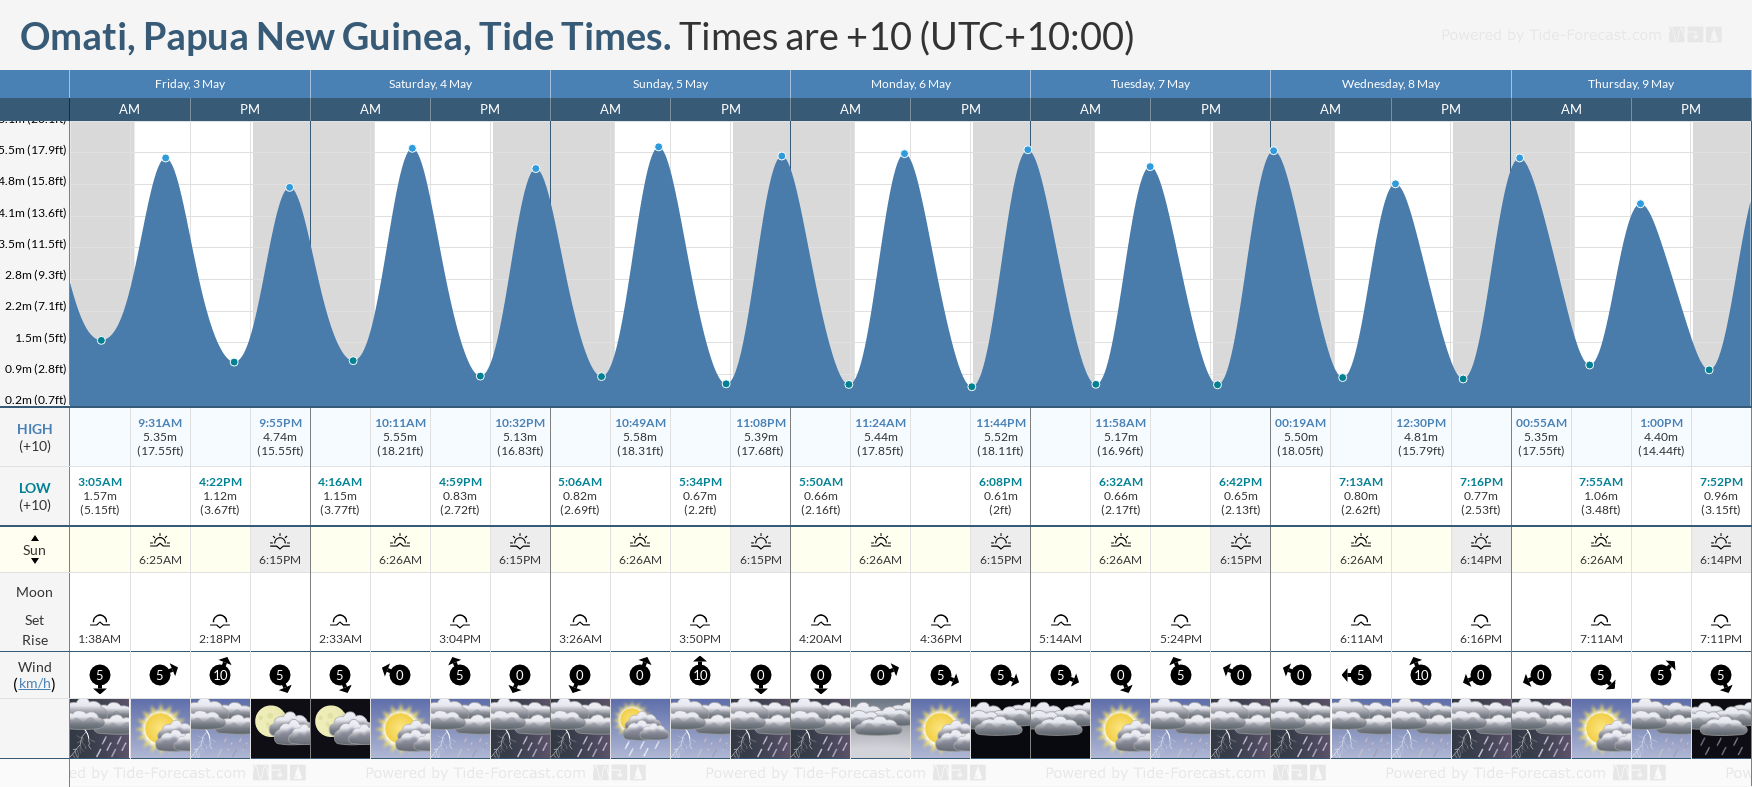 Omati, Papua New Guinea Tide Chart including high and low tide tide times for the next 7 days